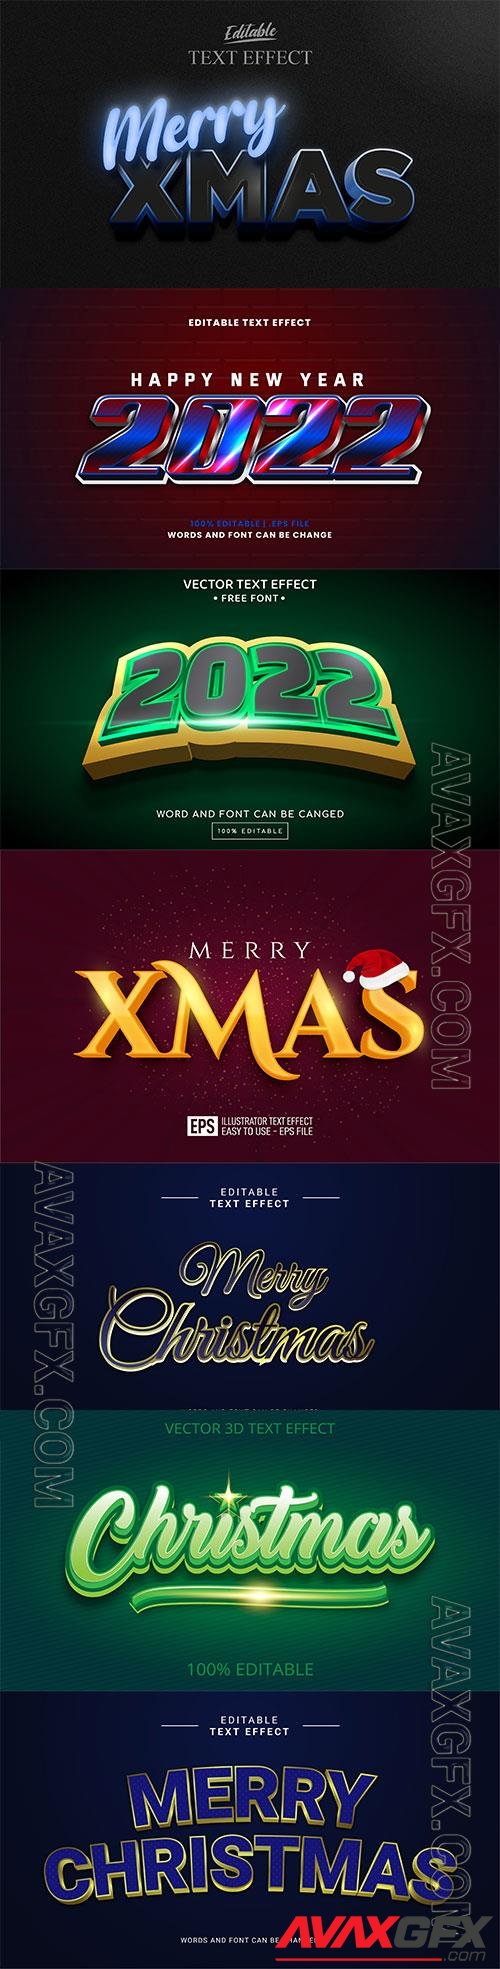 2022 New year and christmas editable text effect vector vol 30